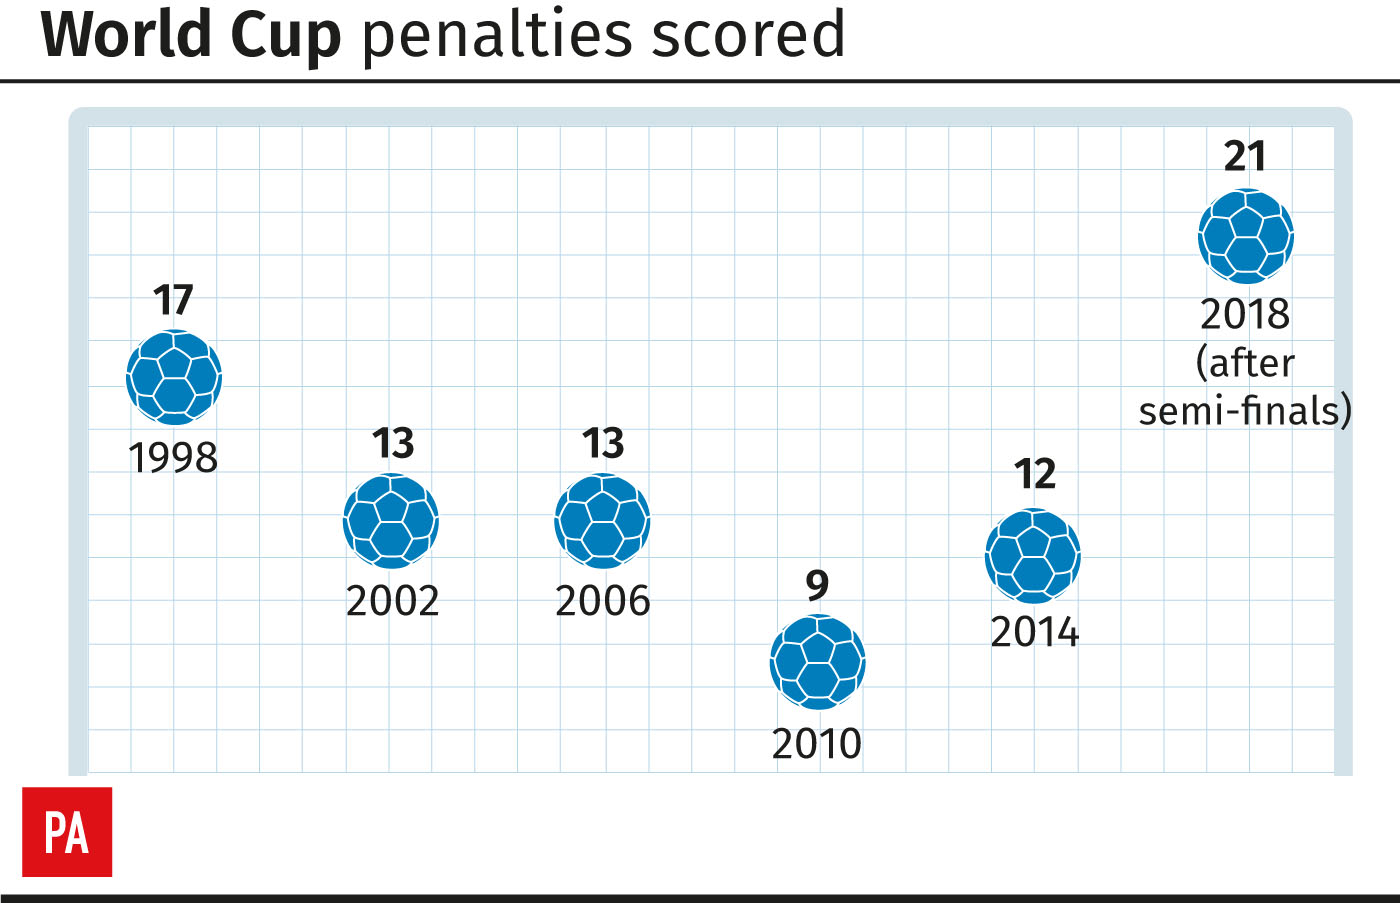 Penalties scored at World Cups since 1998